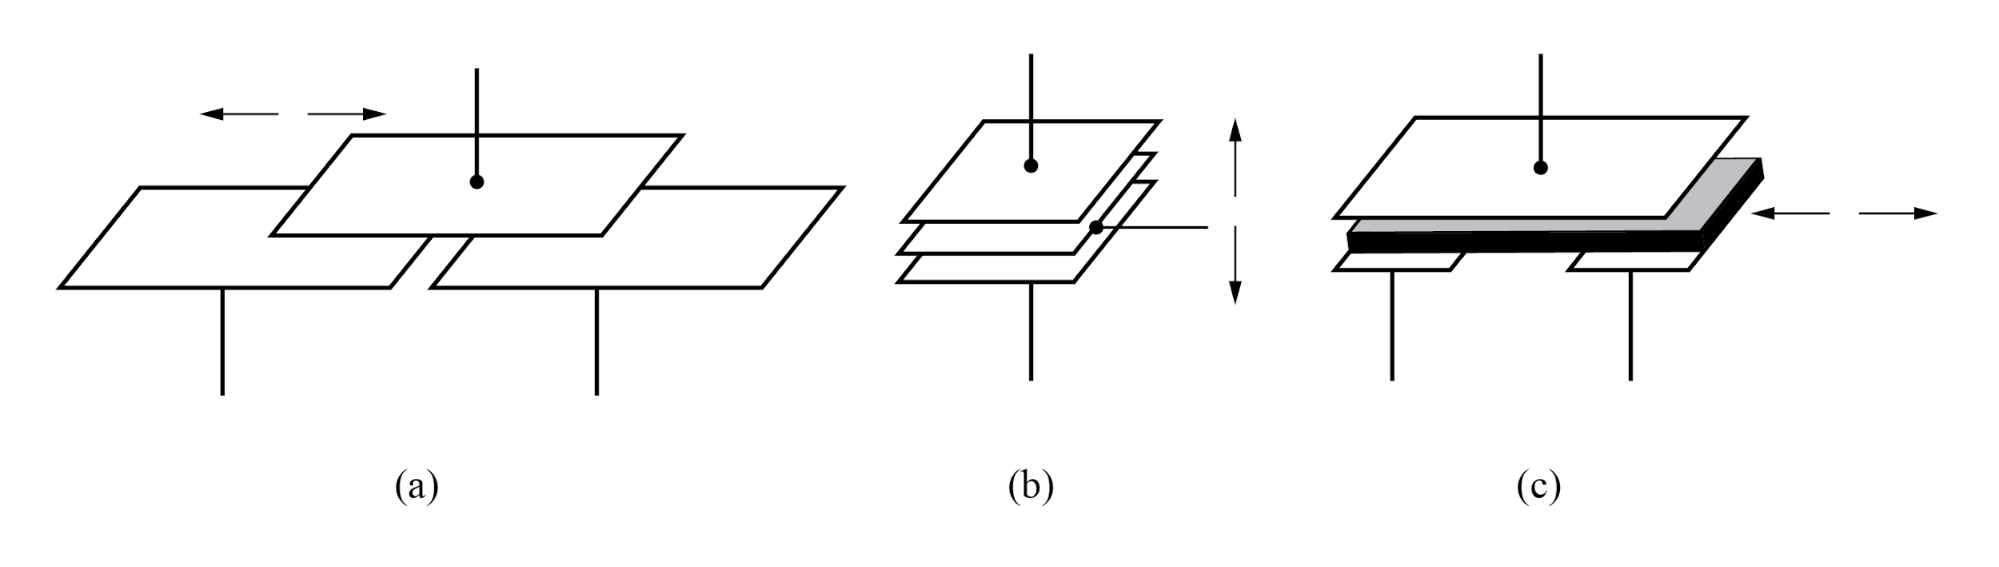 Differential capacitive transducer varies capacitance ratio by changing: (a) area of overlap, (b) distance between plates, (c) dielectric between plates.